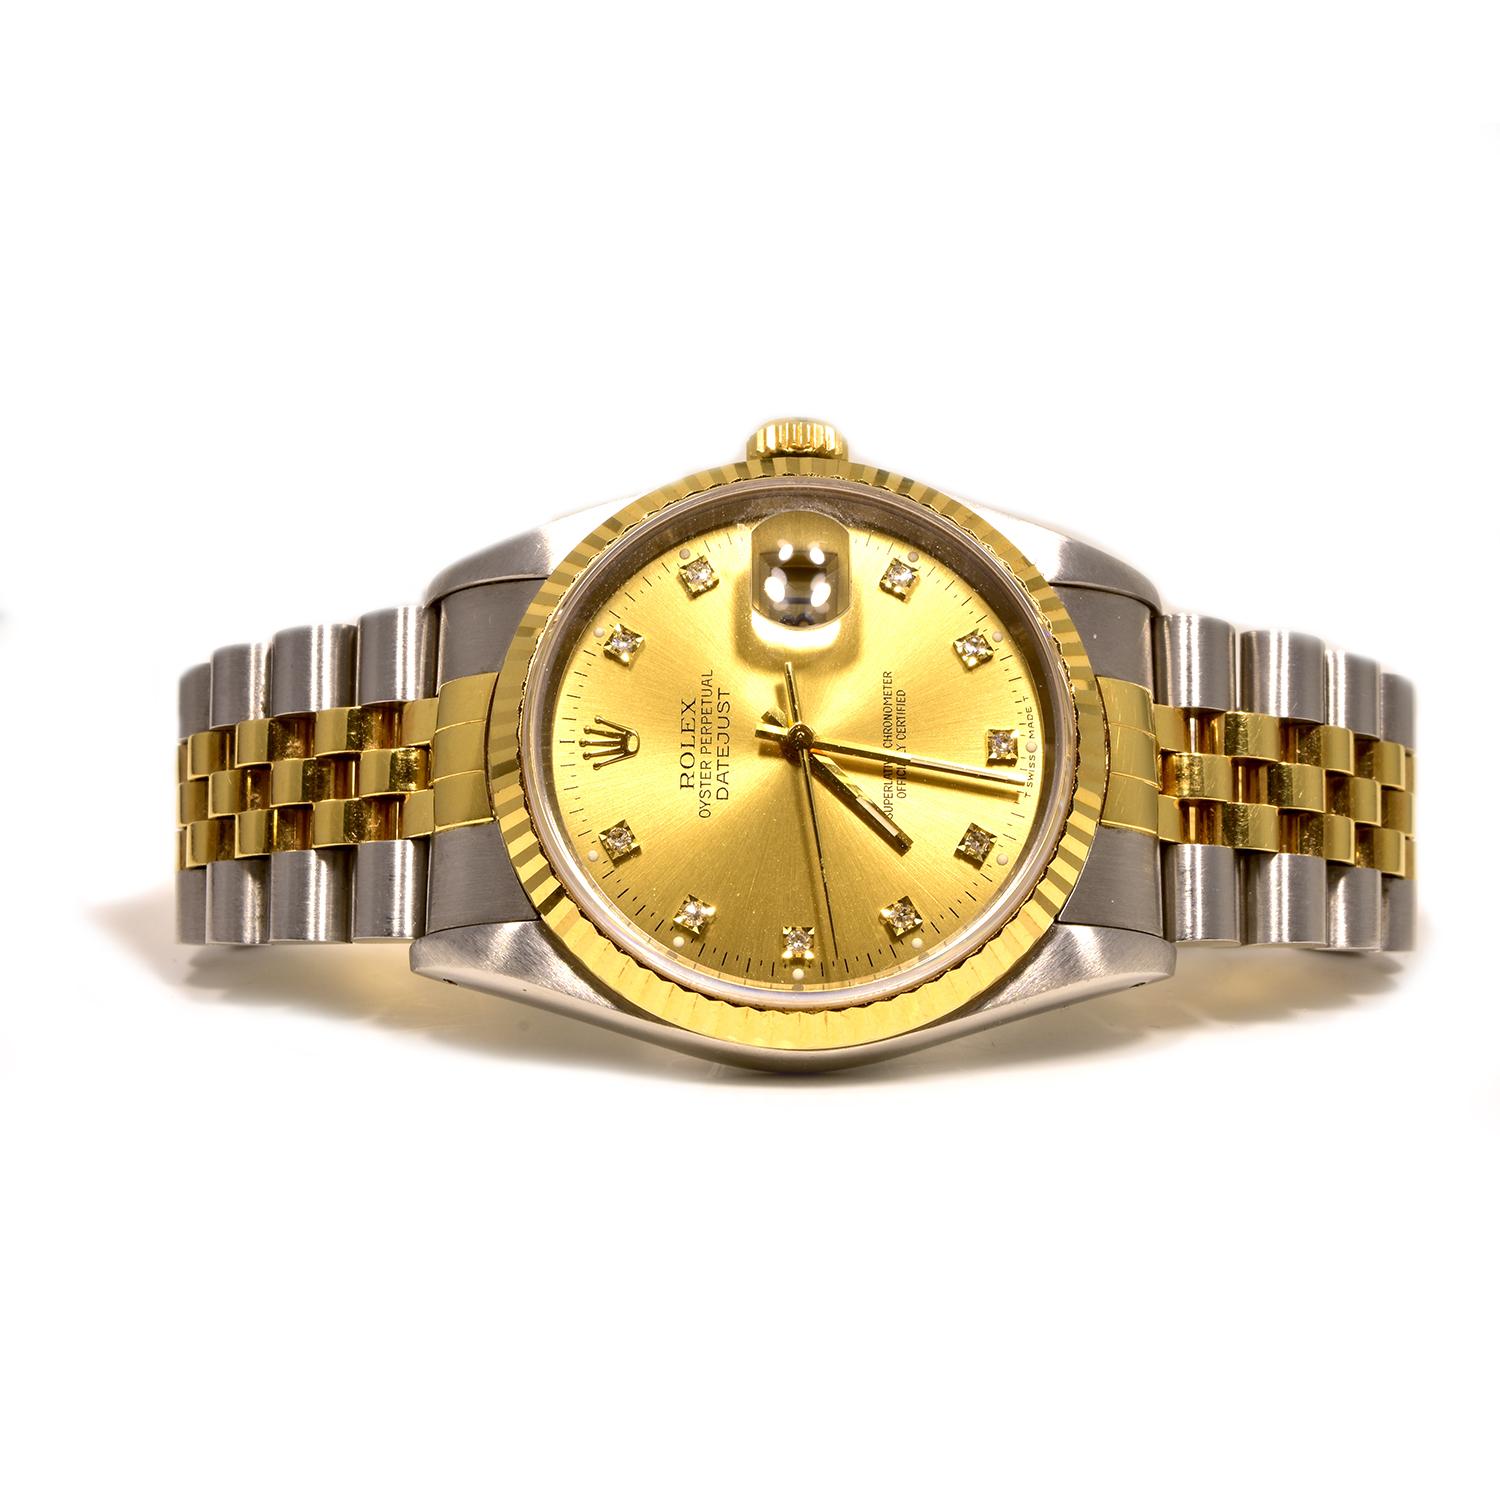 Brand: Rolex

Model Name: Date Just 

Model Number: 16233

Movement: Automatic

Case Size: 36 mm

Case Material: Stainless steel and Yellow Gold

Bezel: Yellow Gold 

Dial: Gold Dial with Diamond index markers

Bracelet:  Jubilee

​​​​​​​Crystal: